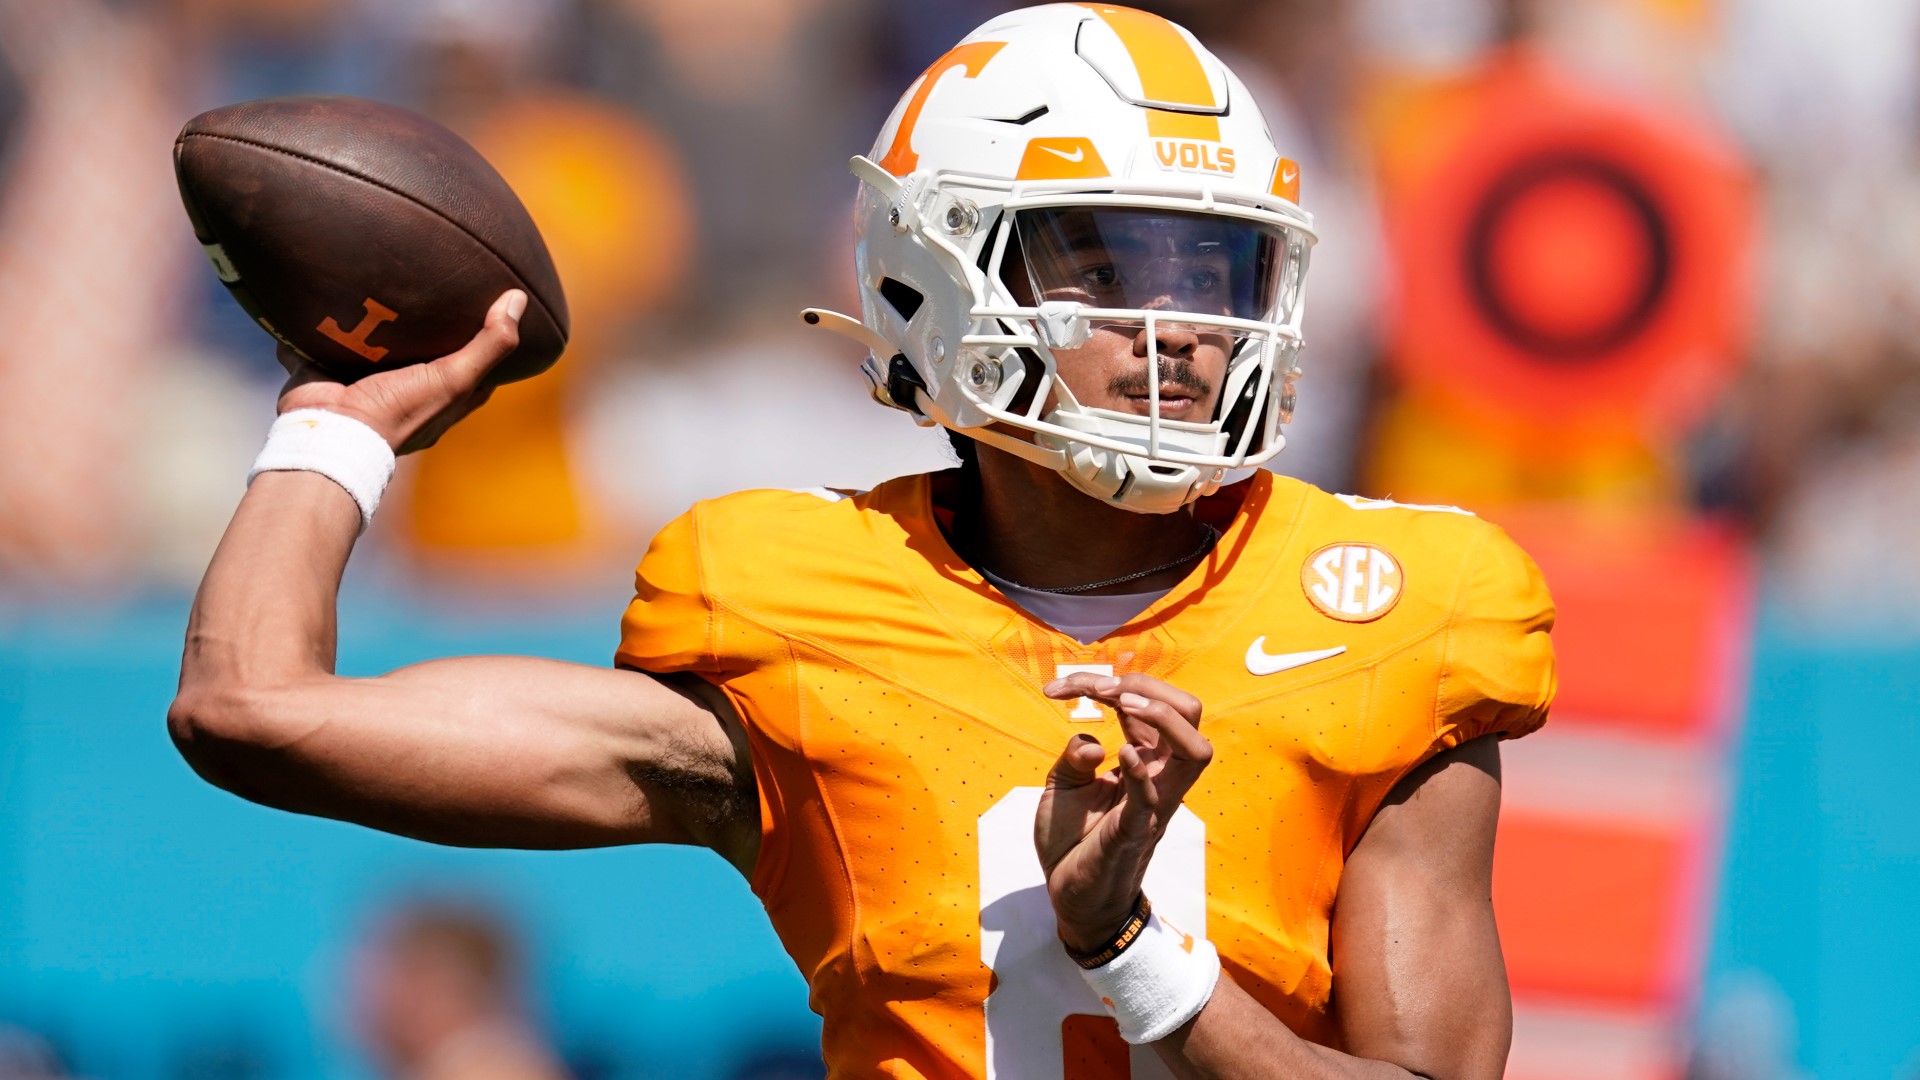 Vols QB Nico Iamaleava's cousin is a linebacker at Texas A&M. Many family members have traveled to Knoxville this weekend to support both of them.